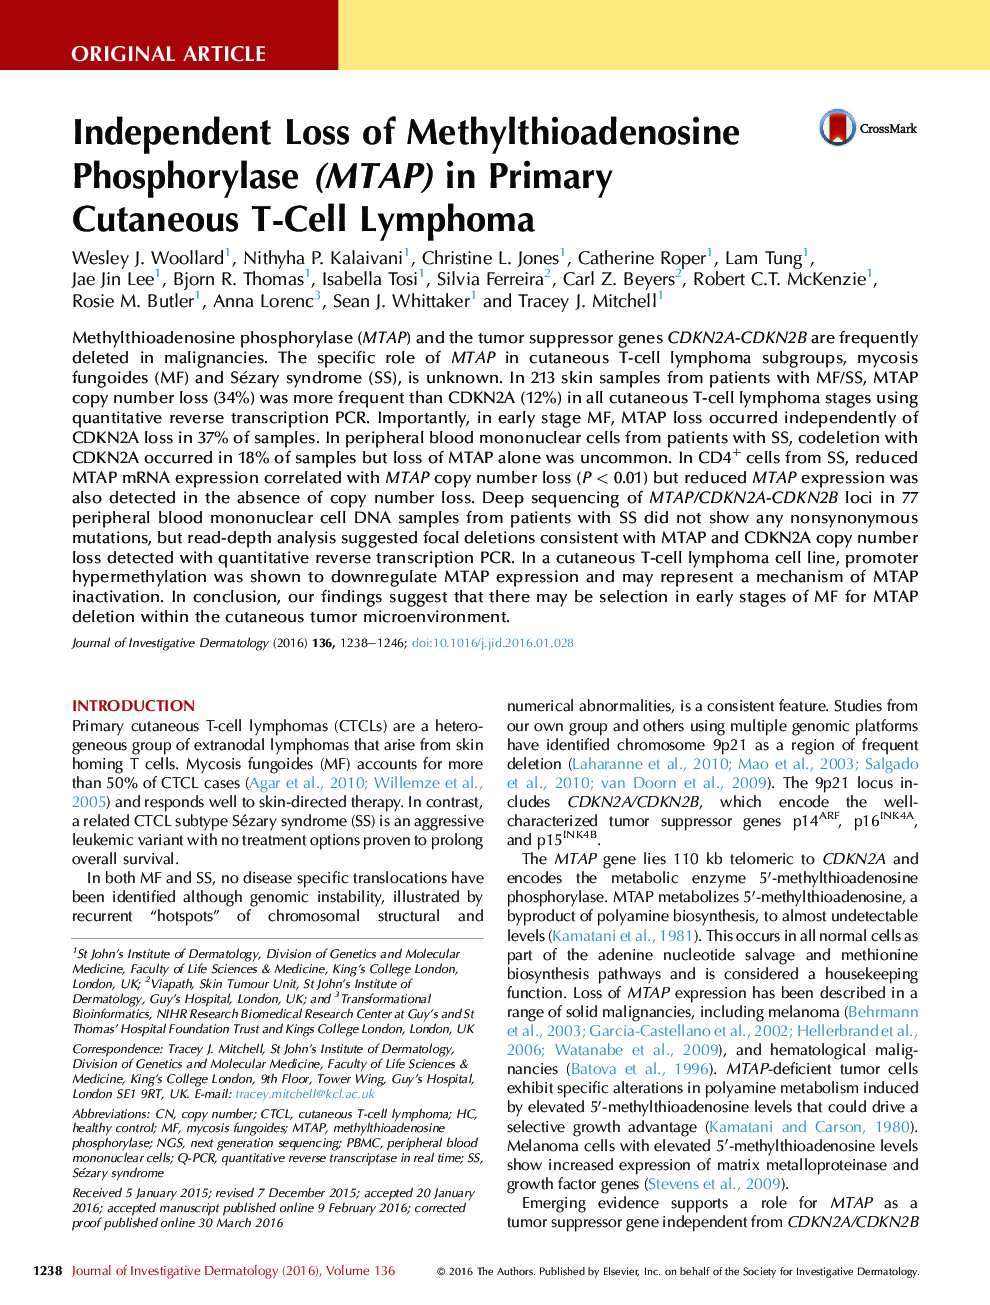 Original ArticleTumor BiologyIndependent Loss of Methylthioadenosine Phosphorylase (MTAP) in Primary Cutaneous T-Cell Lymphoma